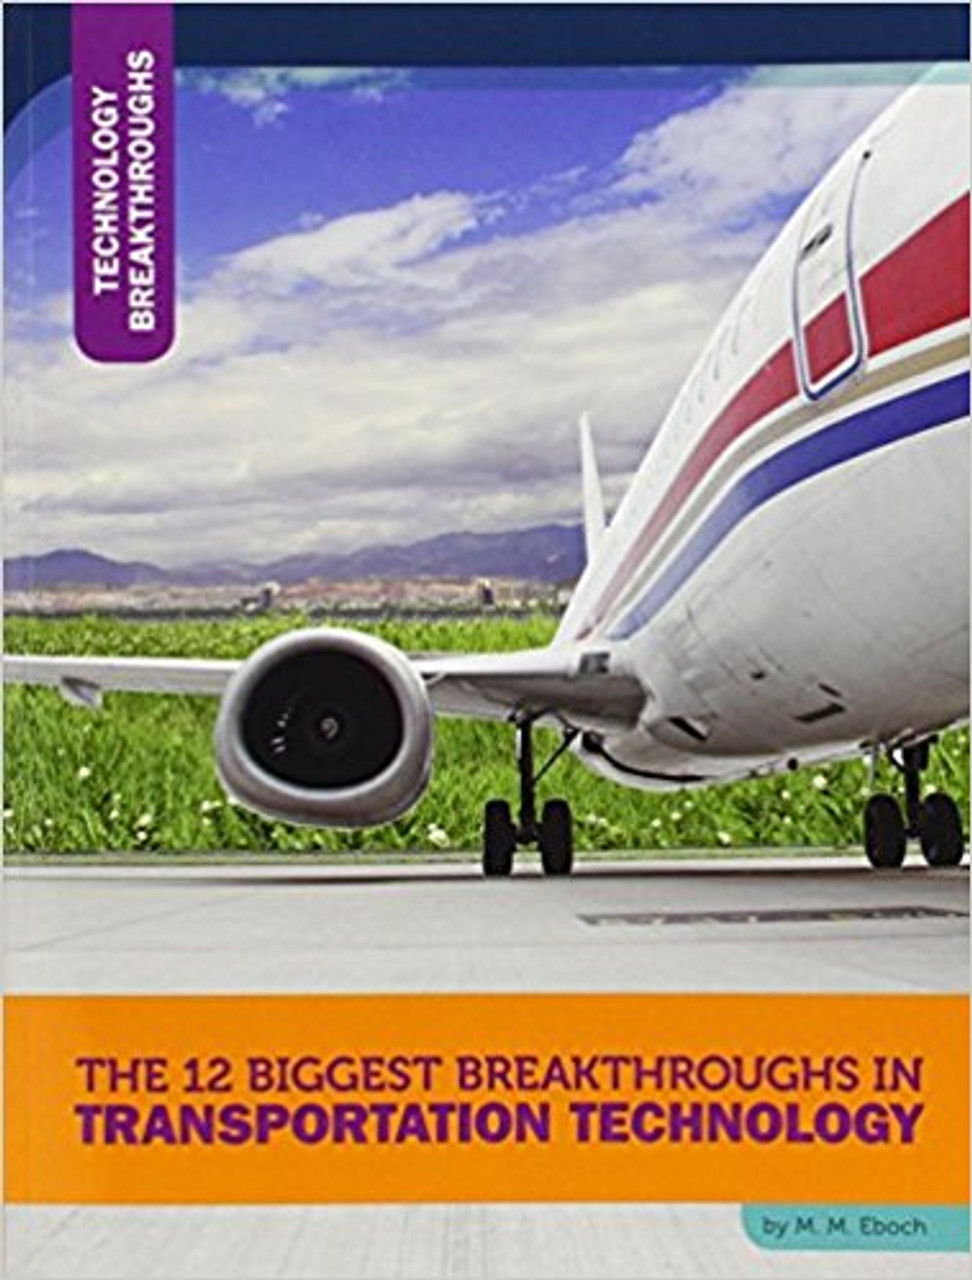 The 12 Biggest Breakthroughs in Transportation Technology (Paperback) by M.M. Eboch